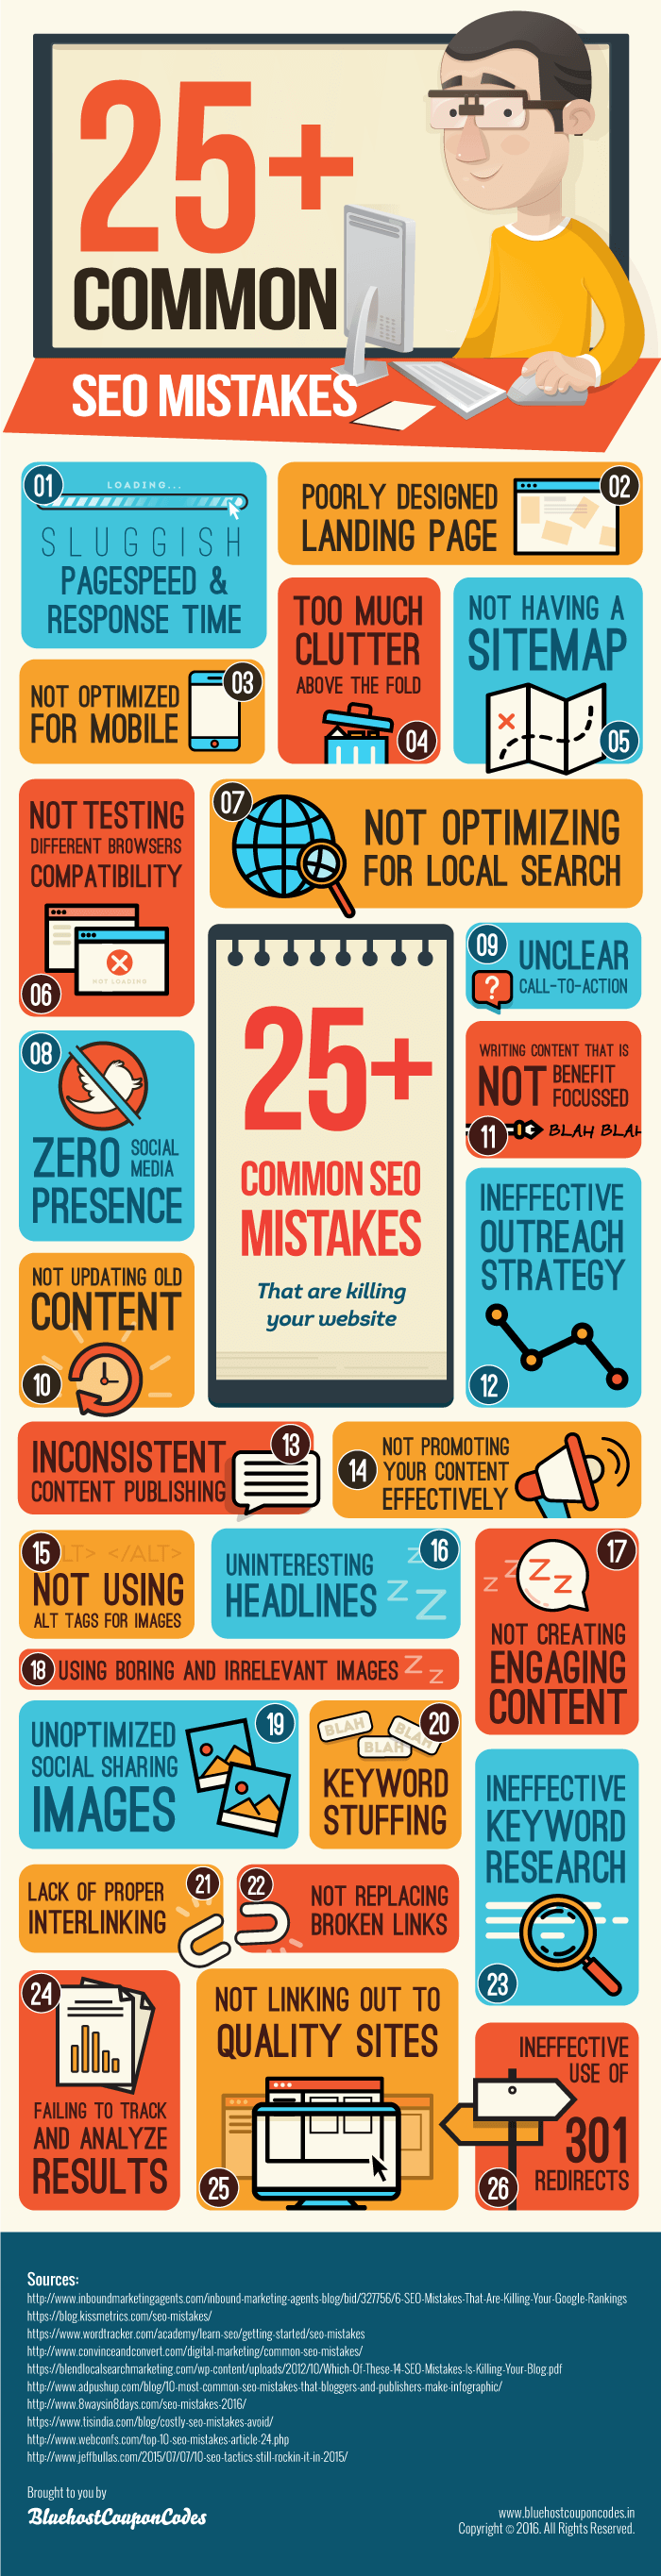 25+ Common SEO Mistakes That Are Killing Your Website[Infographic] by the team at bluehostcouponcodes.in